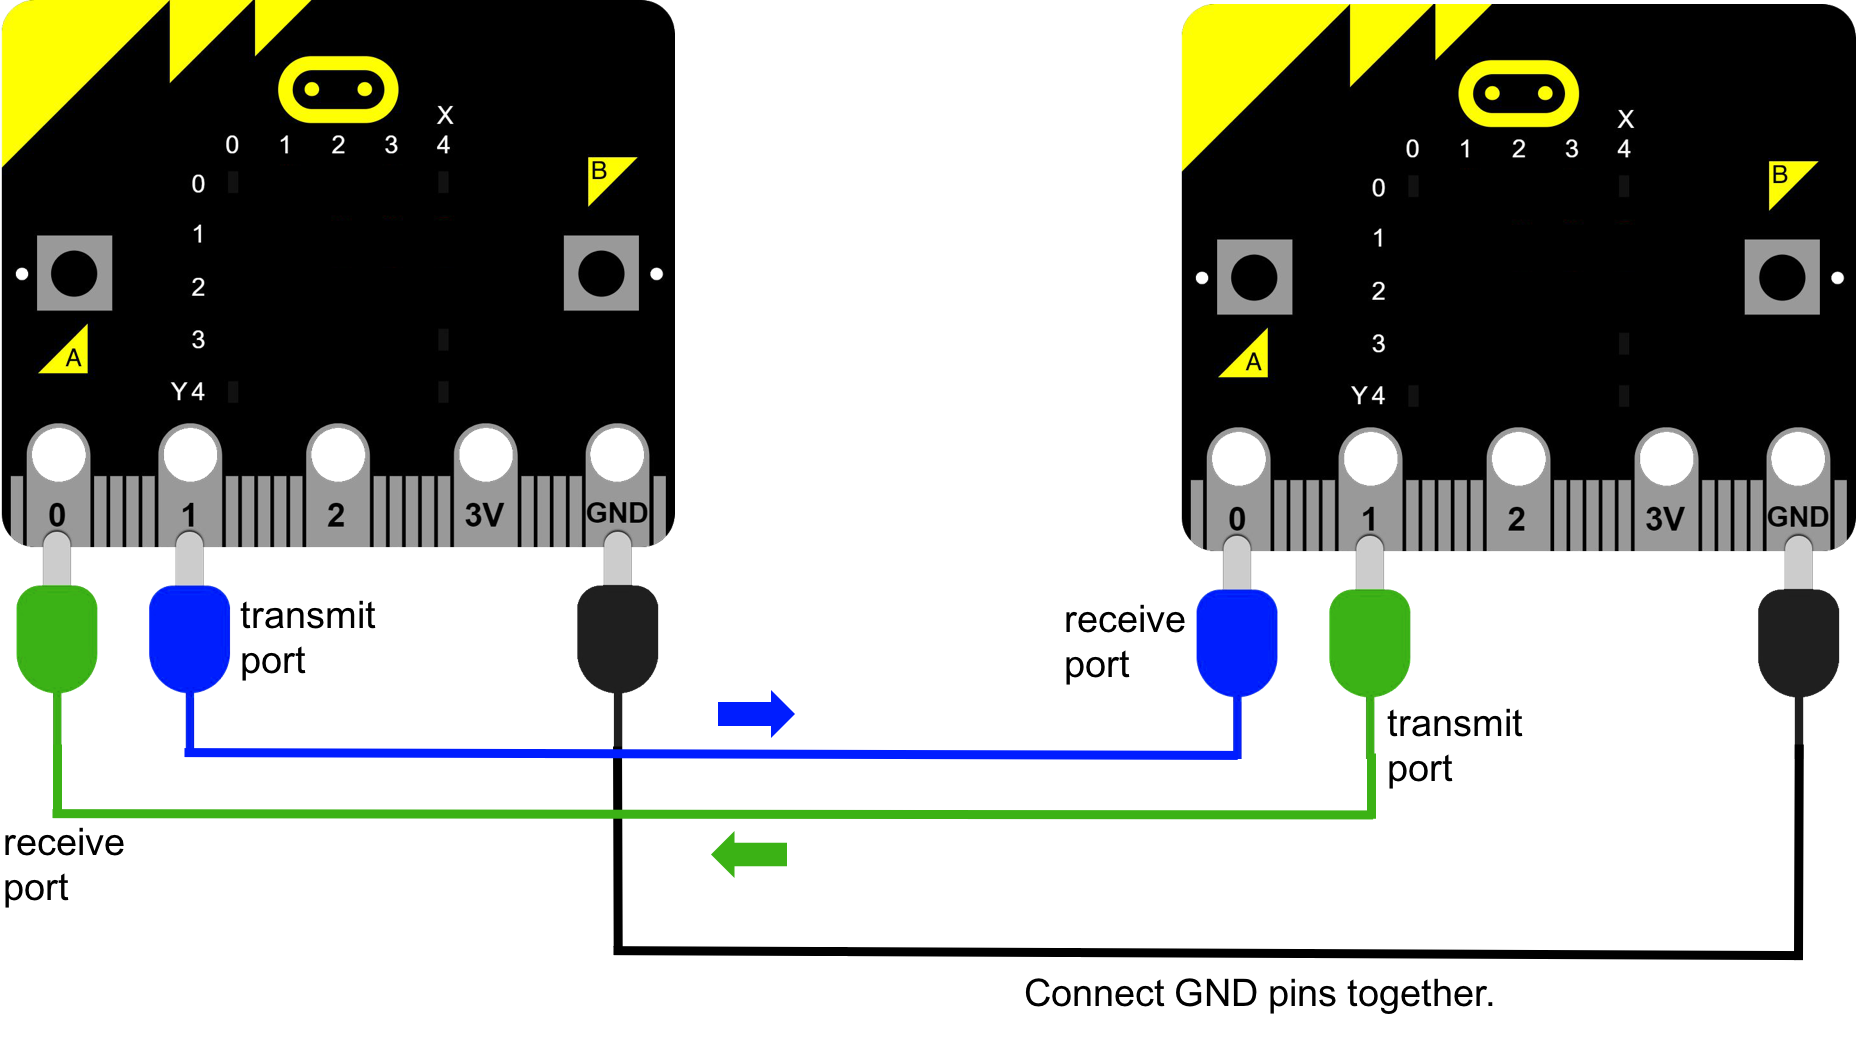 Diagram of two micro:bits connected together with three cables. Both devices are yellow Each device has a grid: an X axis labelled 0, 1, 2, 3, 4; and a Y axis labelled 0, 1, 2, 3, 4. Each device has two buttons labelled A and B. Each device has five pins labelled 0, 1, 2, 3V and GND. Connecting cable 1 is connected to Device 1, Pin 0. This is labelled receive port. It is connected to Device 2 on Pin 1. This is labelled receive port. This cable is green. Connecting cable 2 is connected to Device 1. This is labelled transmit port. It is connected to Device 2 on Pin 0. This is labelled receive port. This cable is blue. Connecting cable 3 connects the GND pins on the two devices together. This cable is black.